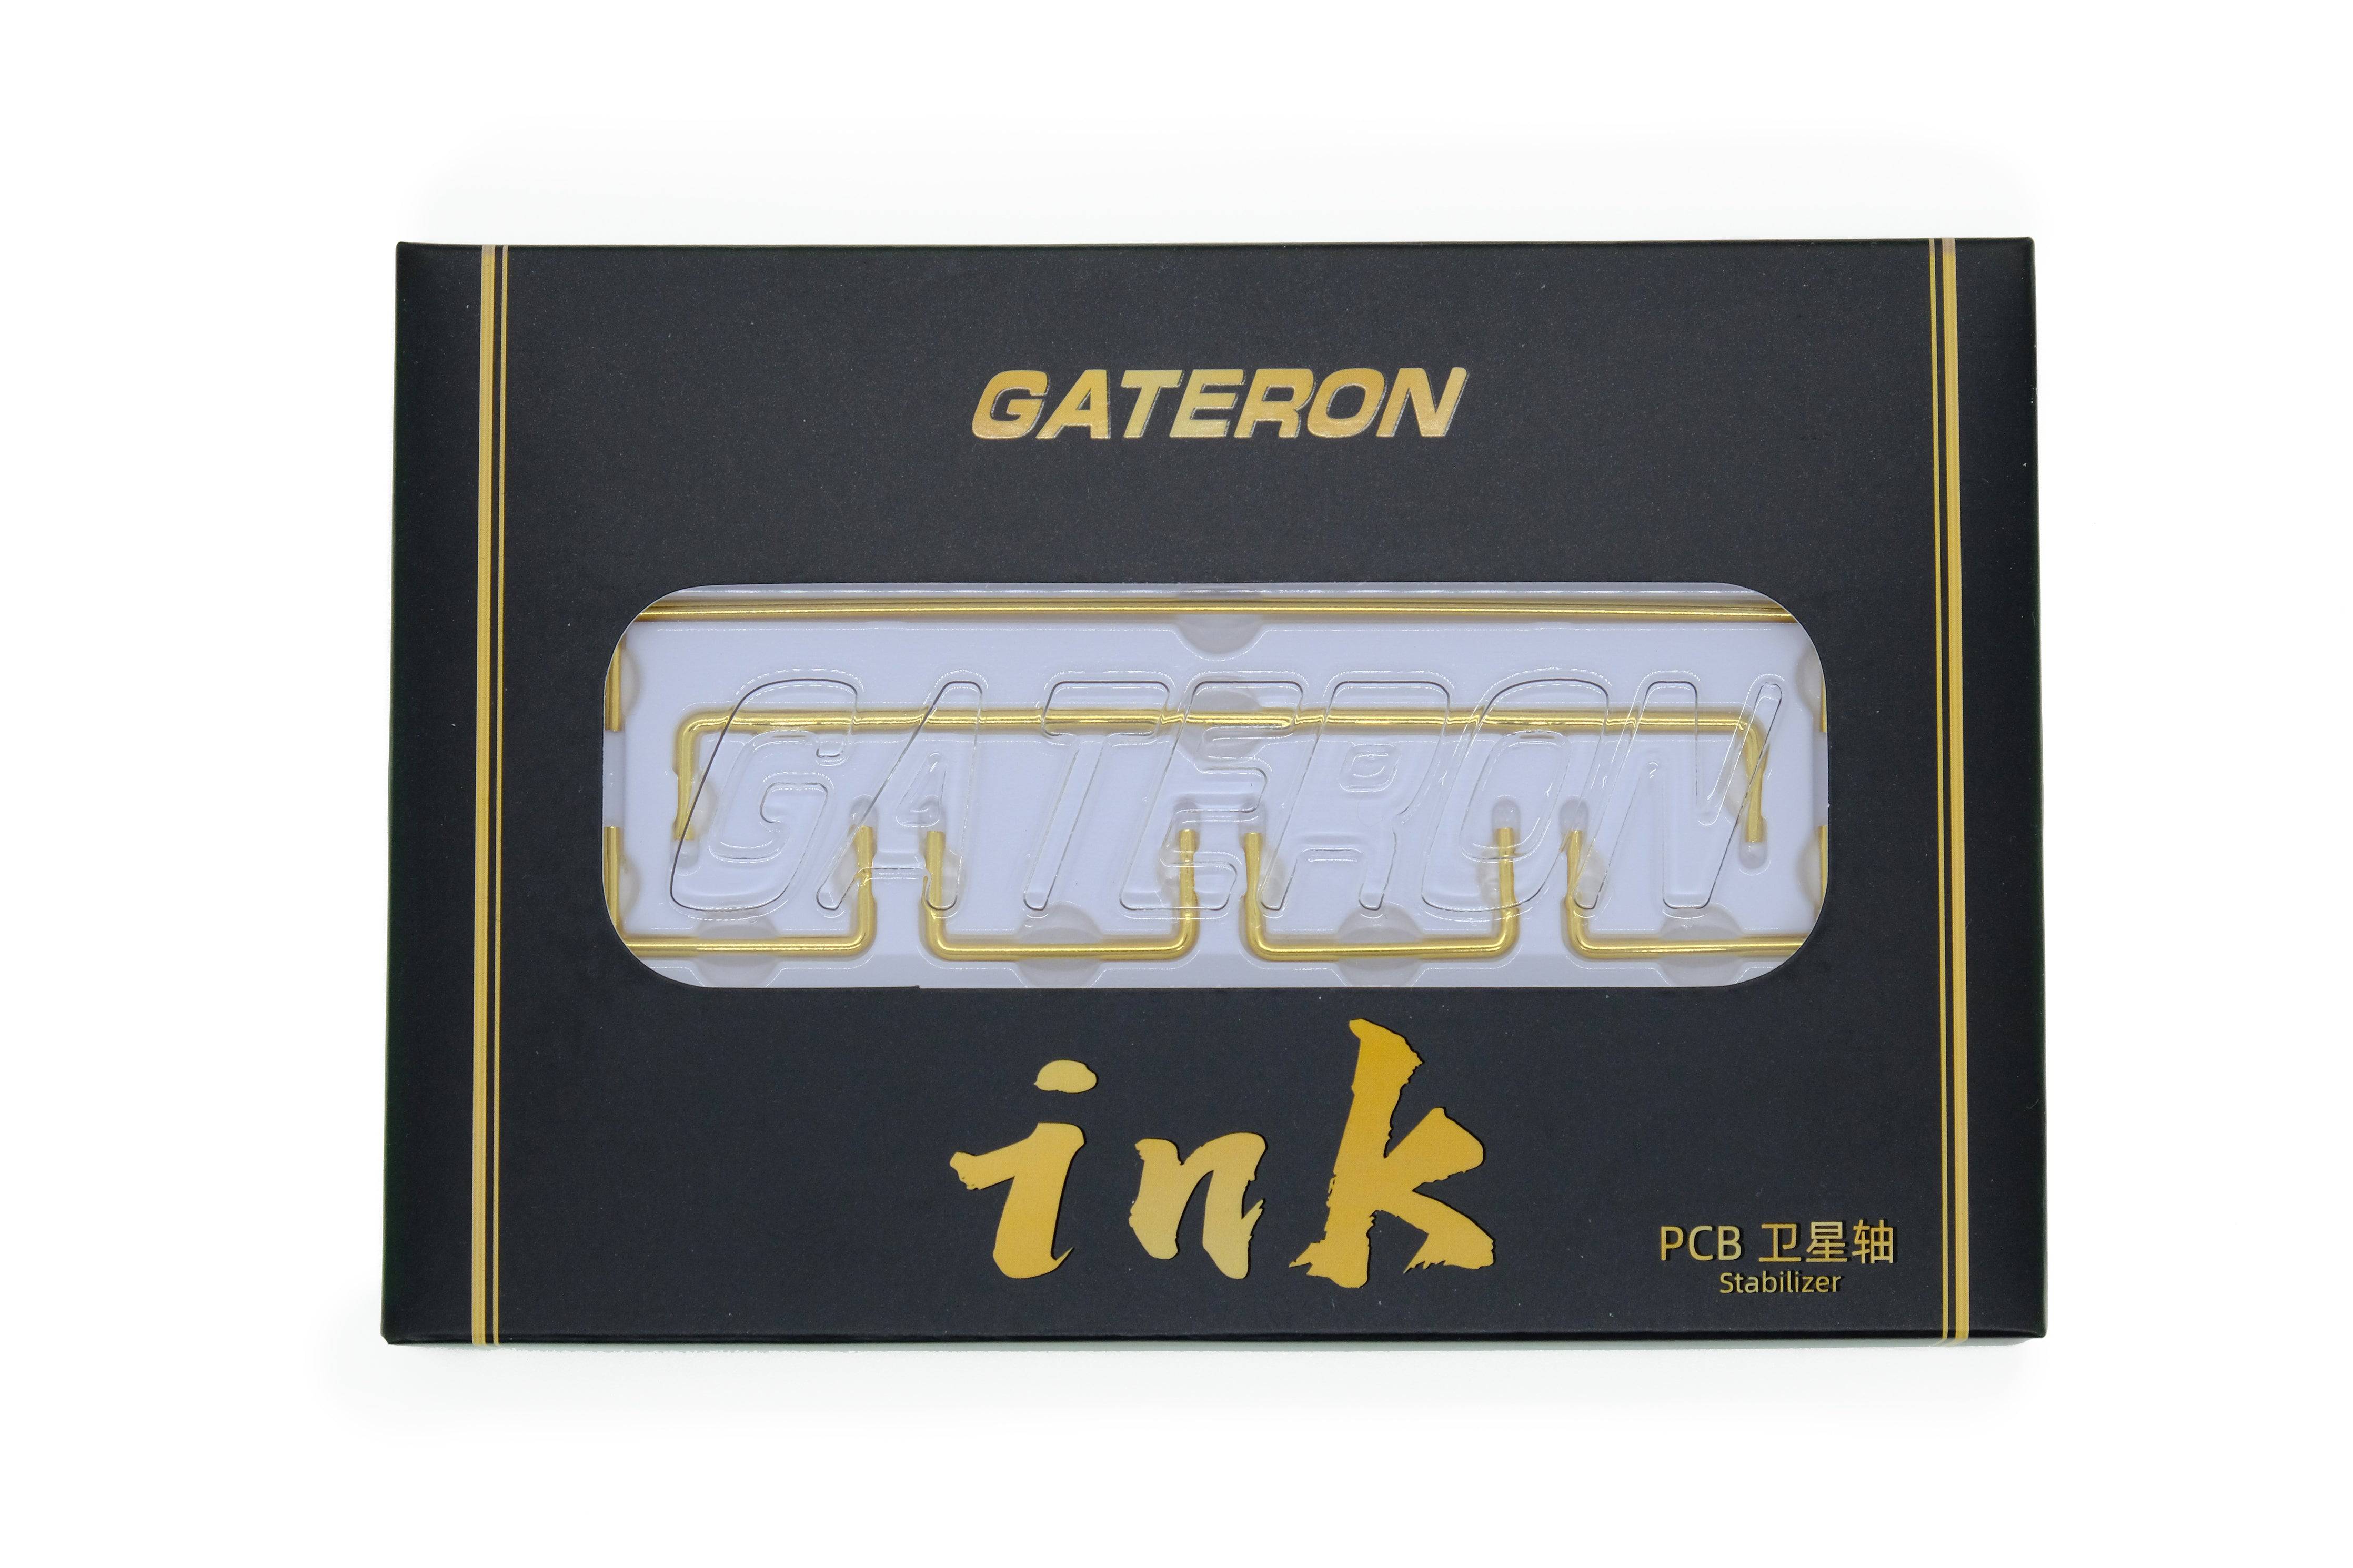 Gateron Ink PCB Stabilizer (Box) at KeebsForAll